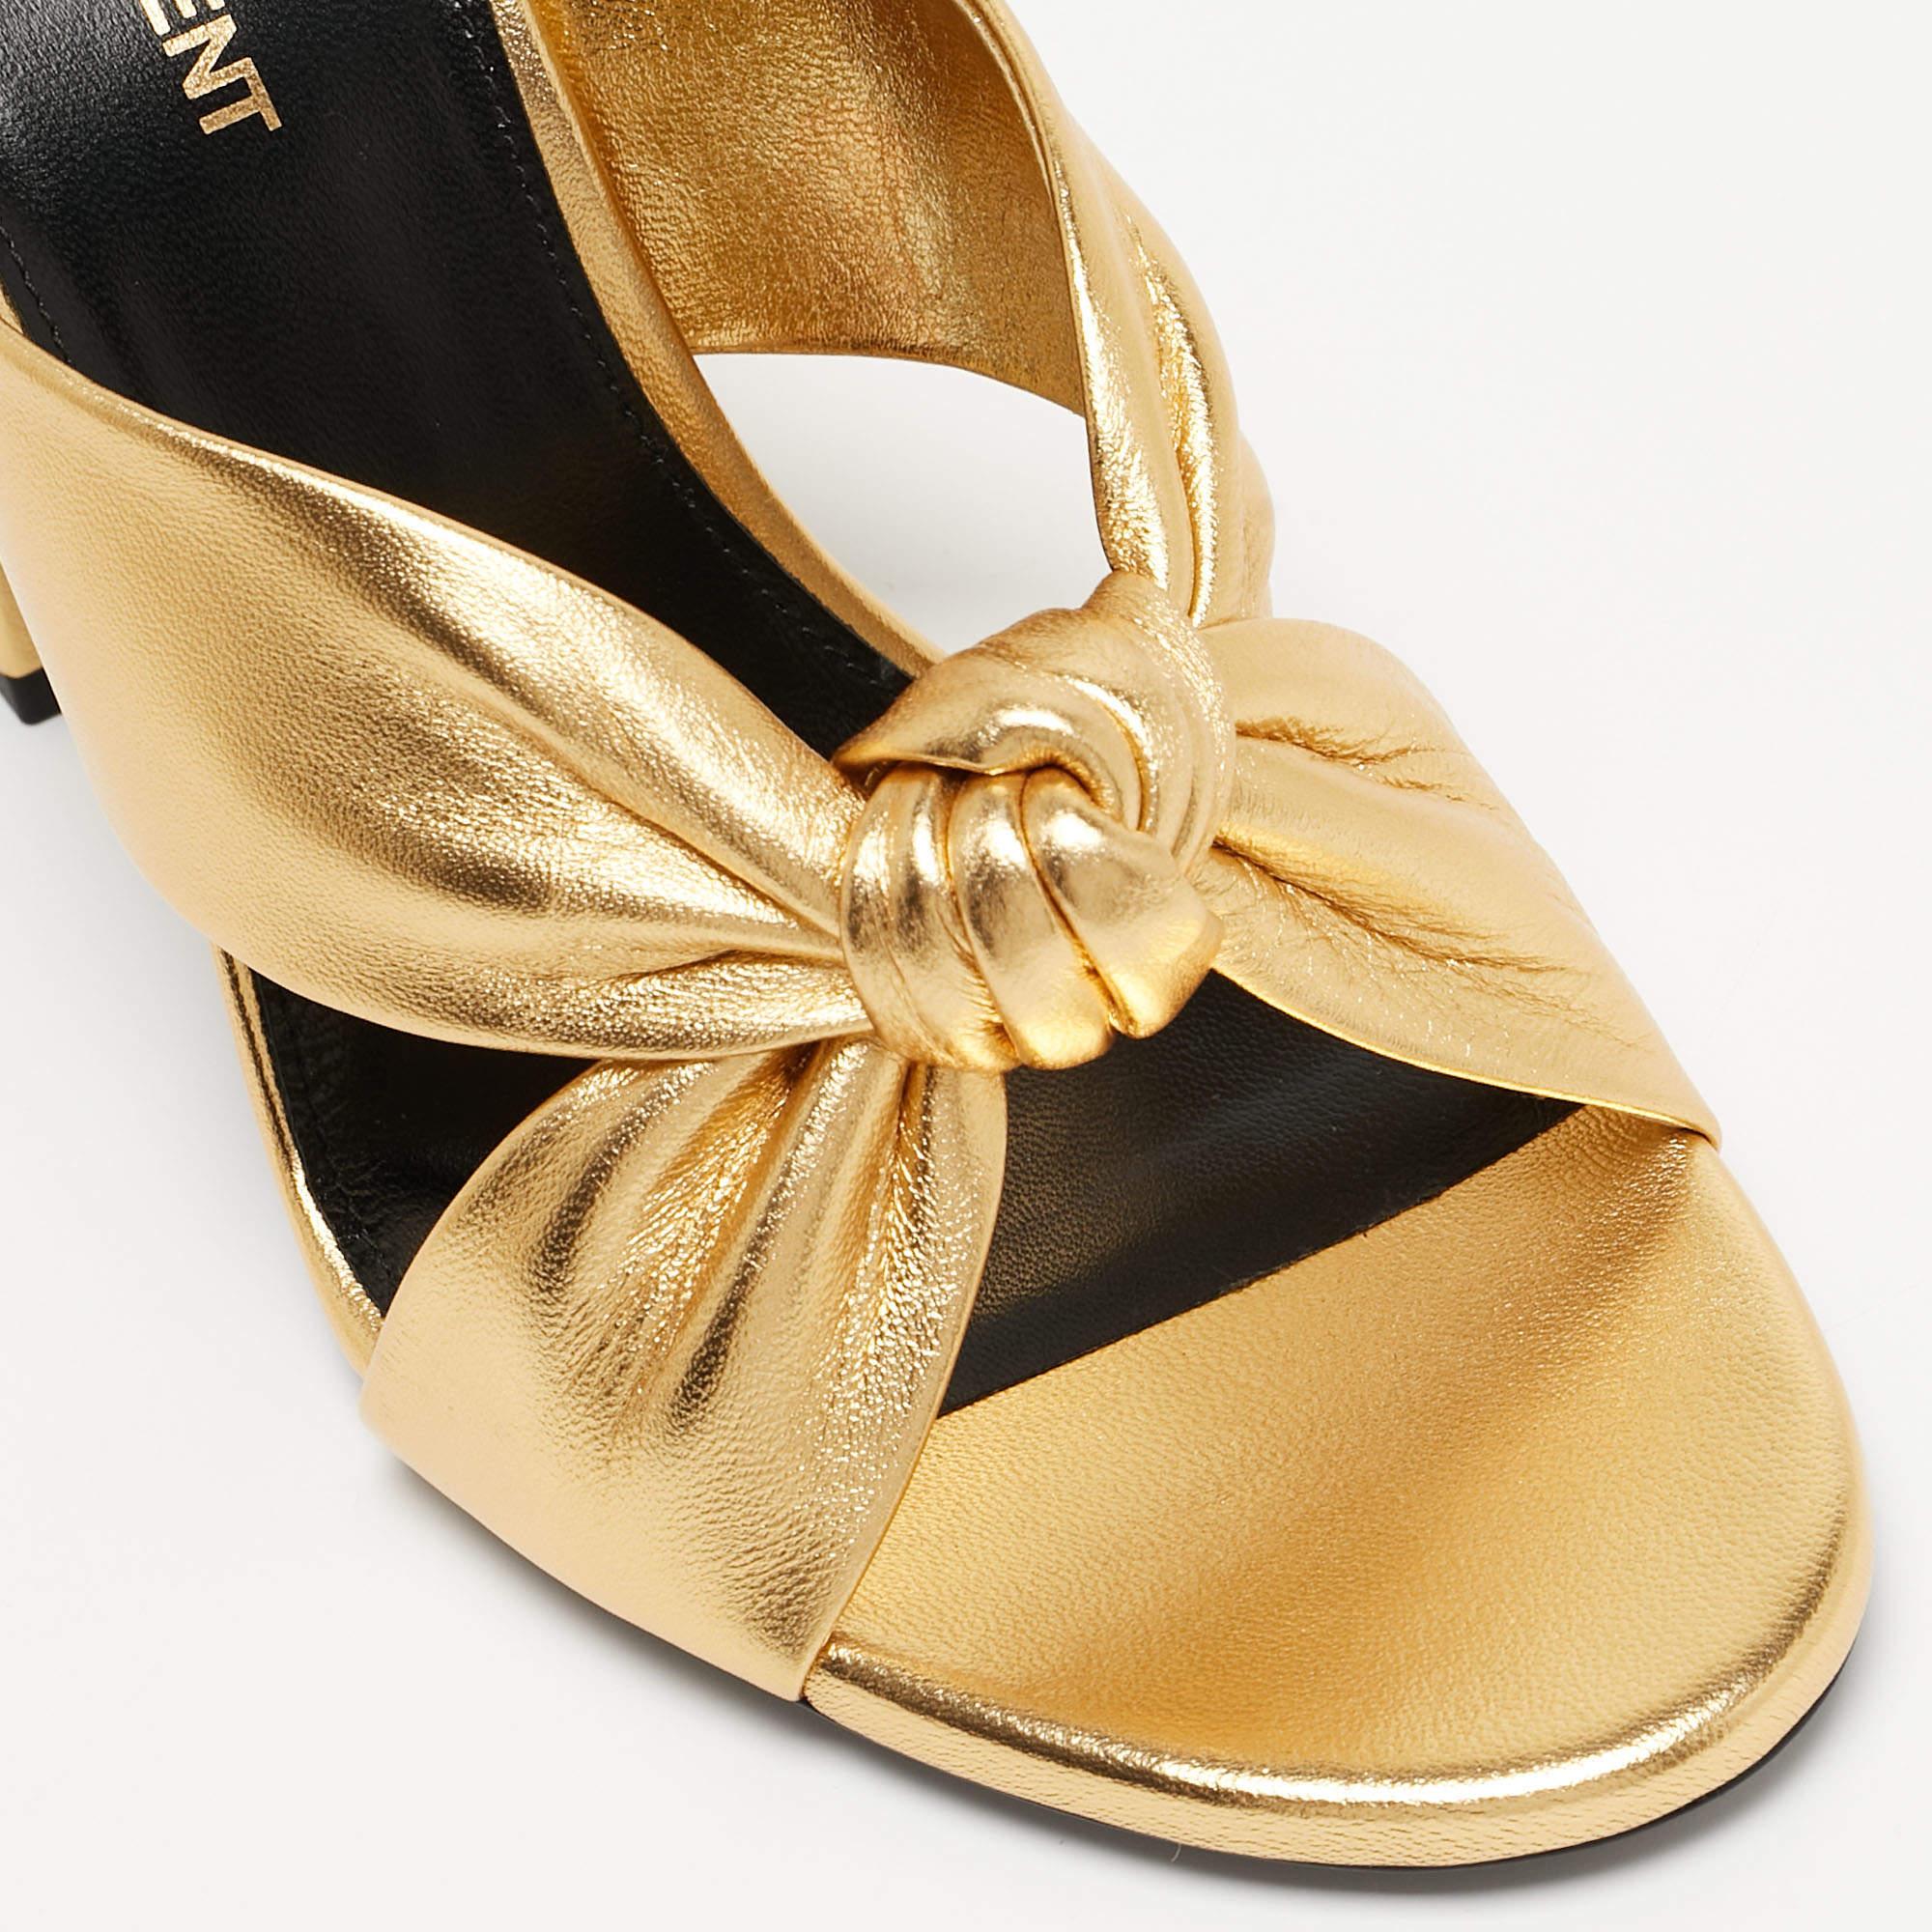 One look at this pair of Saint Laurent slides and our hearts skip a beat. These beautiful slids have been styled with perfection just so a diva like you can flaunt them. Gold in shade, the slides have been designed with knotted uppers and 10cm